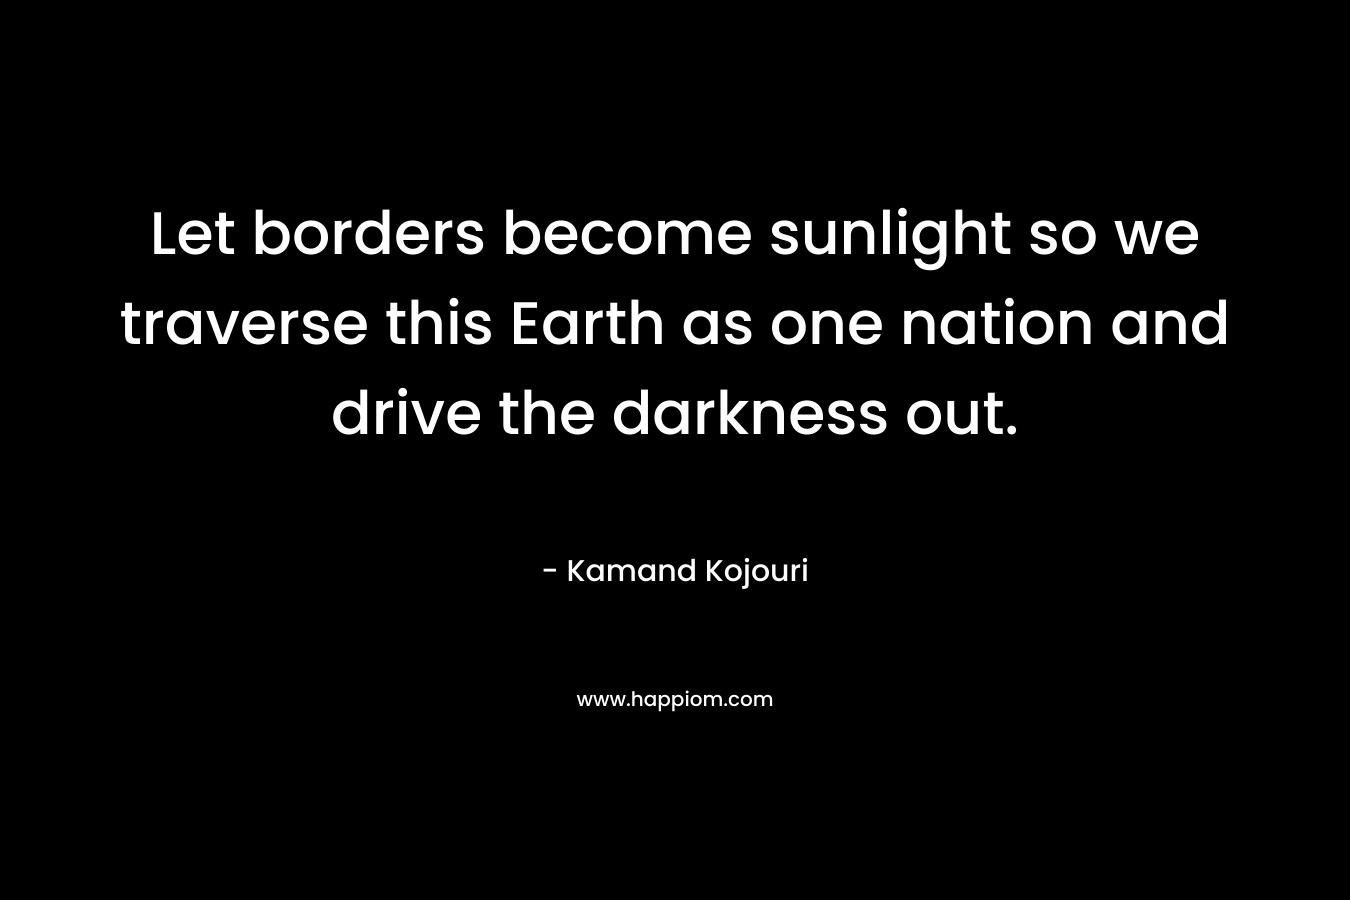 Let borders become sunlight so we traverse this Earth as one nation and drive the darkness out.